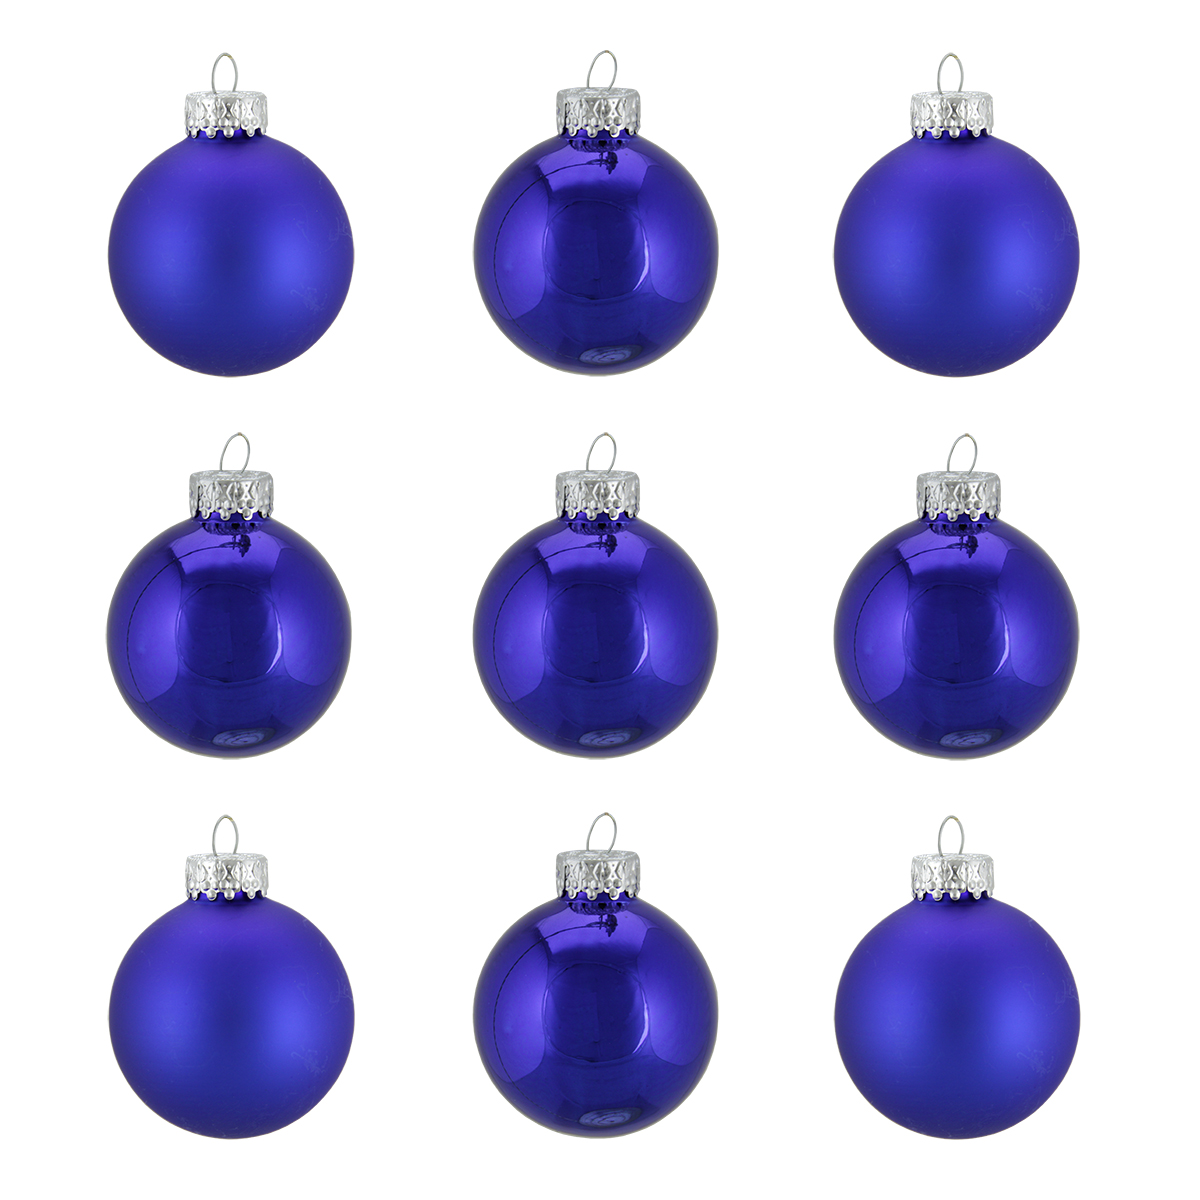 Northlight 9ct Shiny and Matte Cobalt Blue Glass Ball Christmas Ornaments 2" (50mm) - image 1 of 1